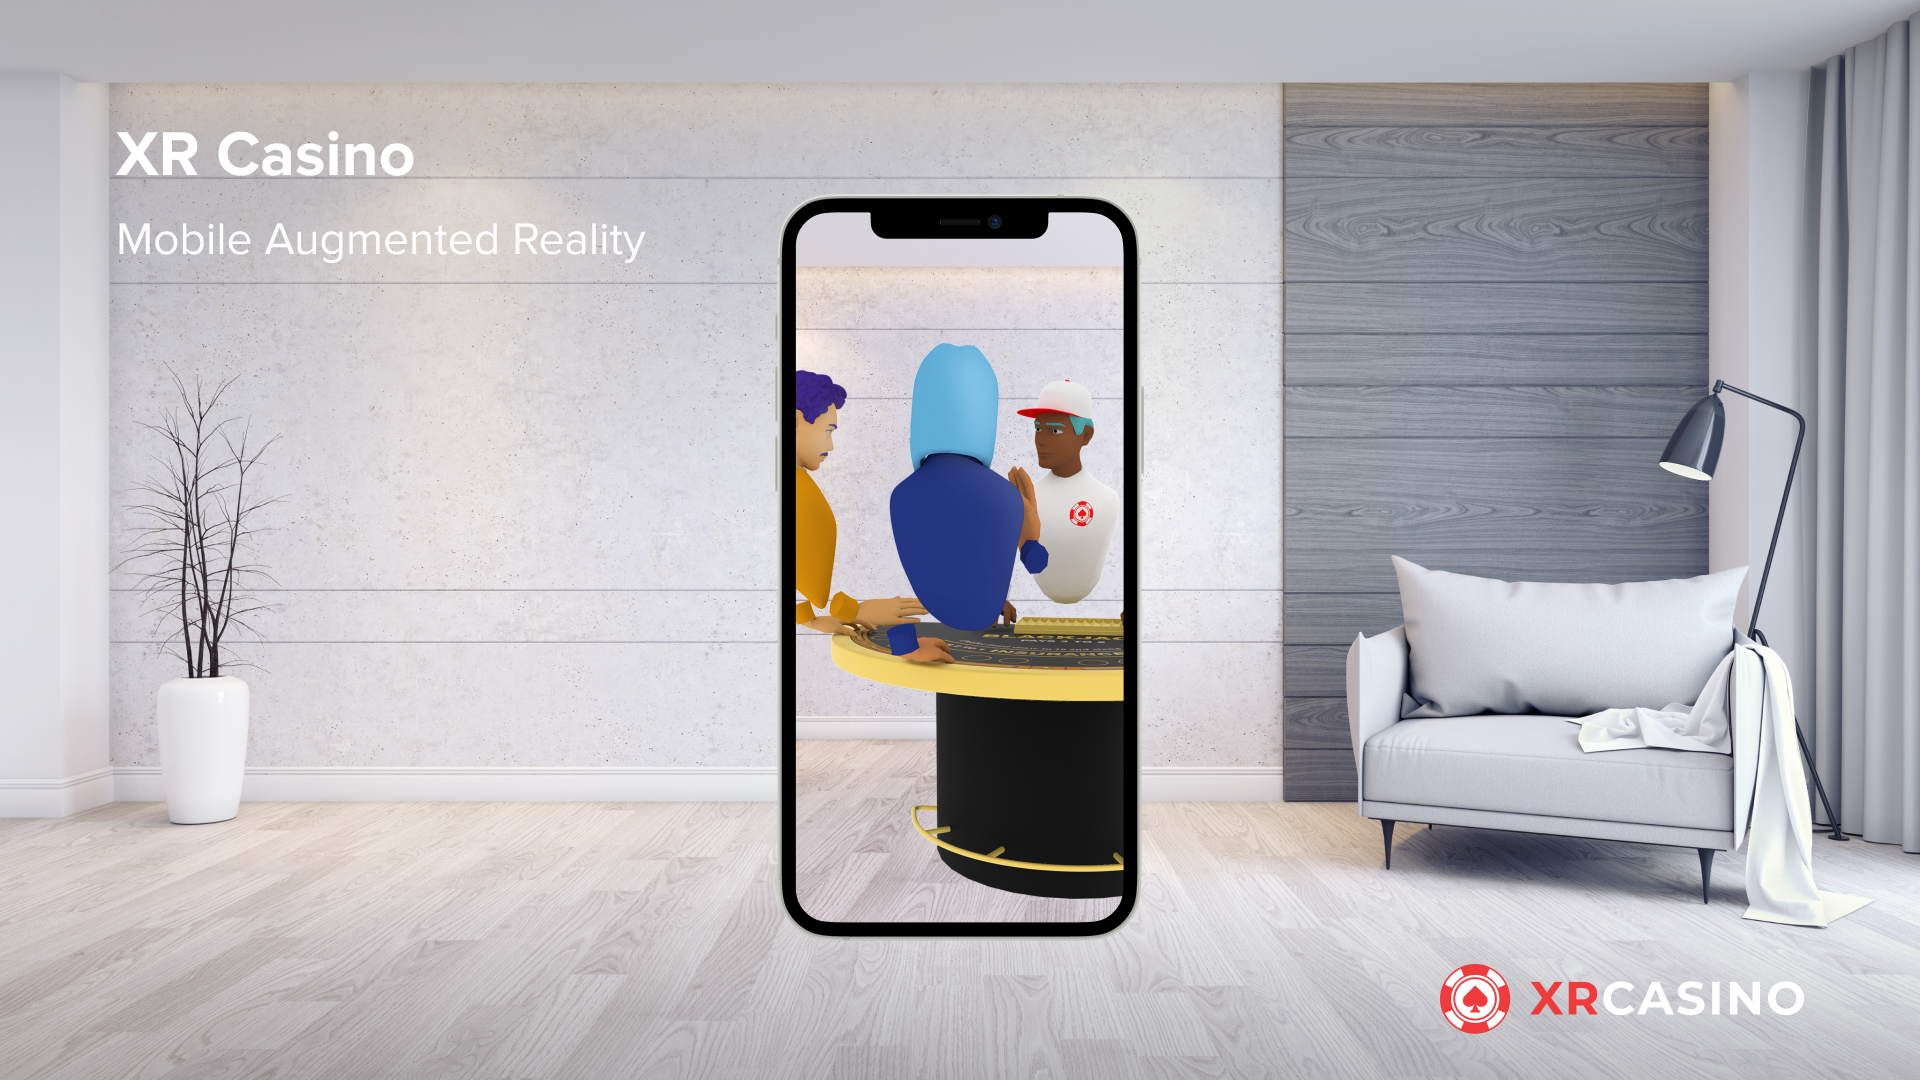 XR Casino - Mobile Augmented Reality